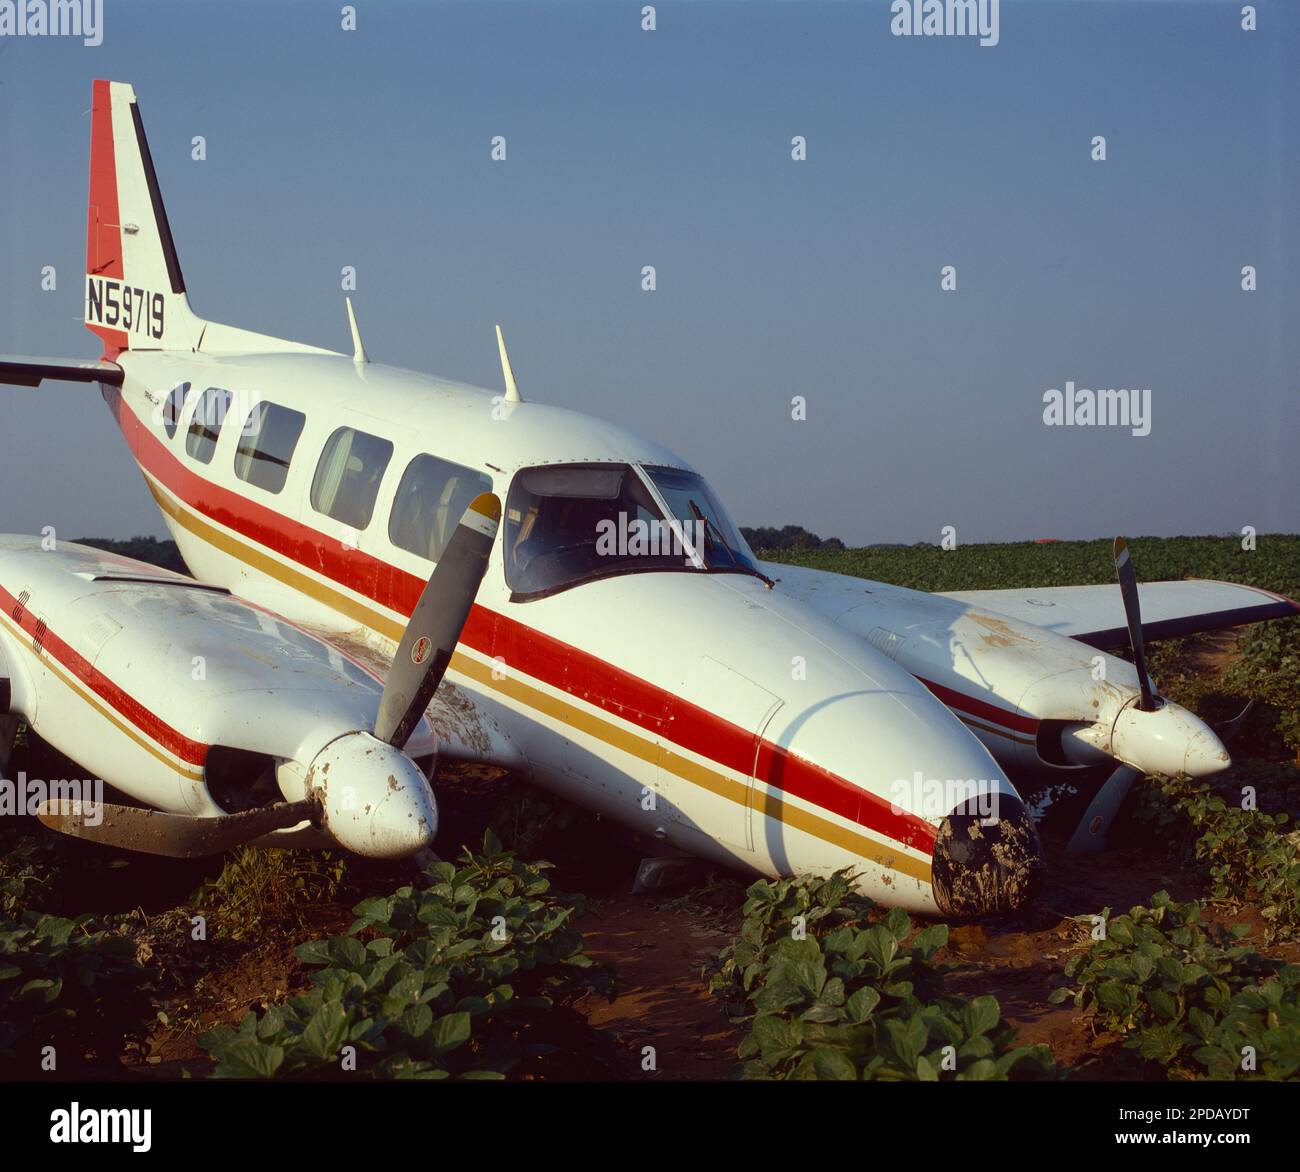 Twin-engine general aviation aircraft crashed into a farmer's field Stock Photo